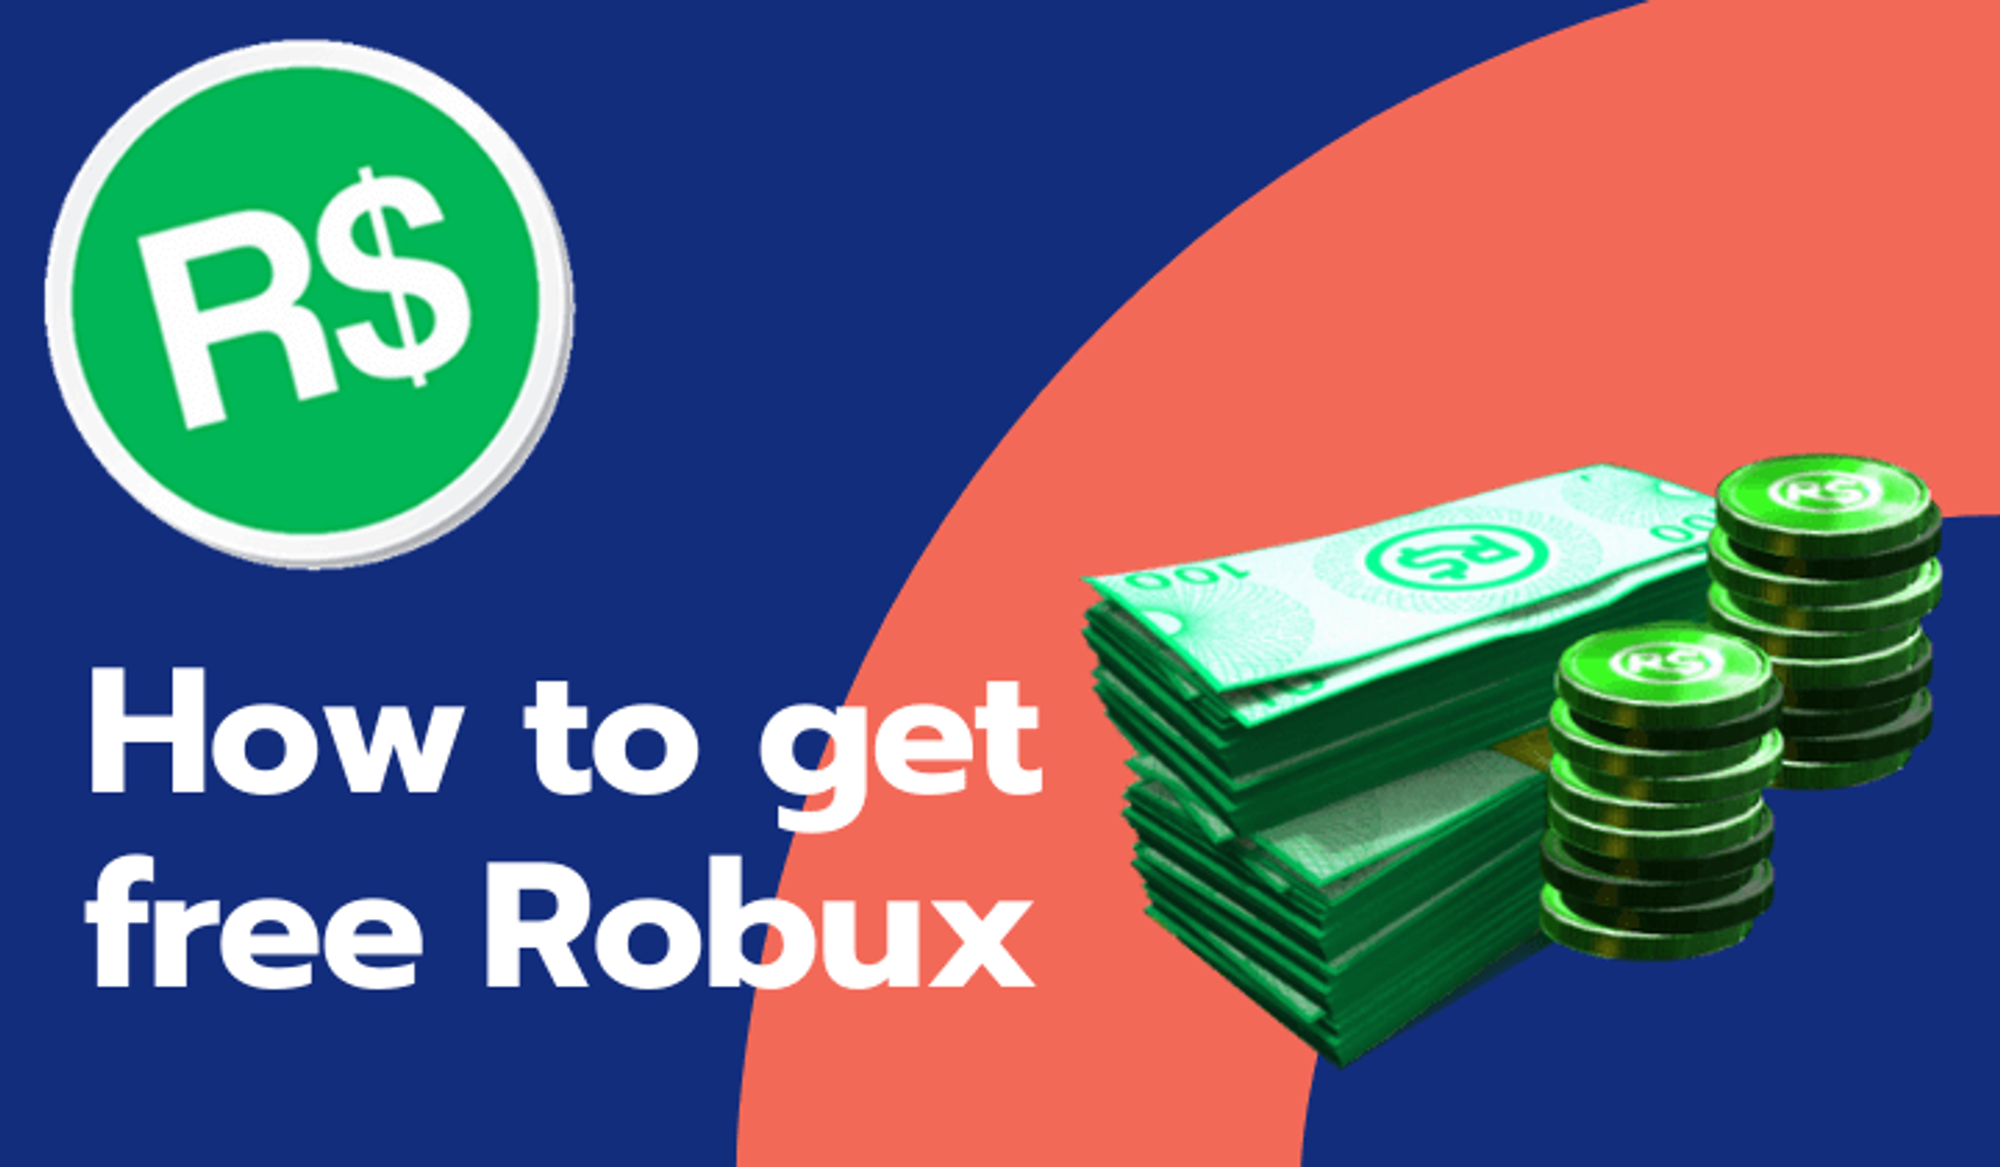 Roblox Robux Generator 2019 Free Unlimited Robux No Human Verification - make unlimited robux for free 2019